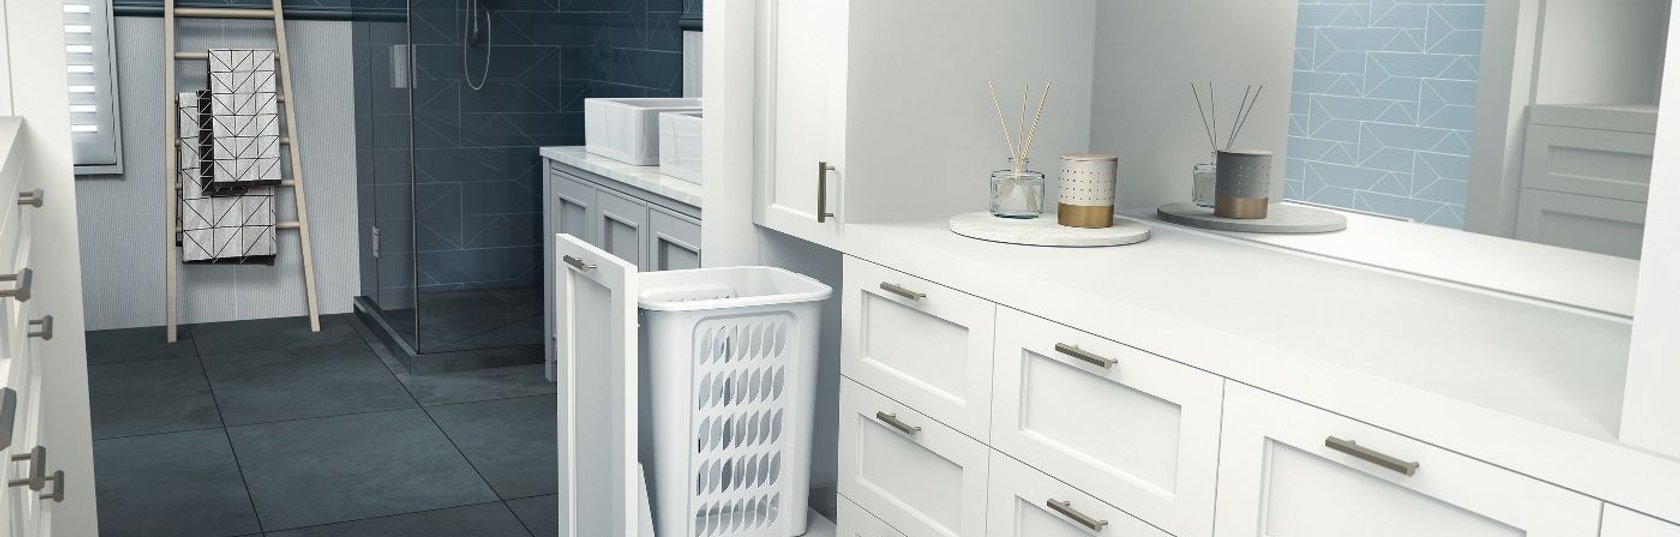 Hideaway Bins launches a base mount laundry hamper that works with a laundry chute!